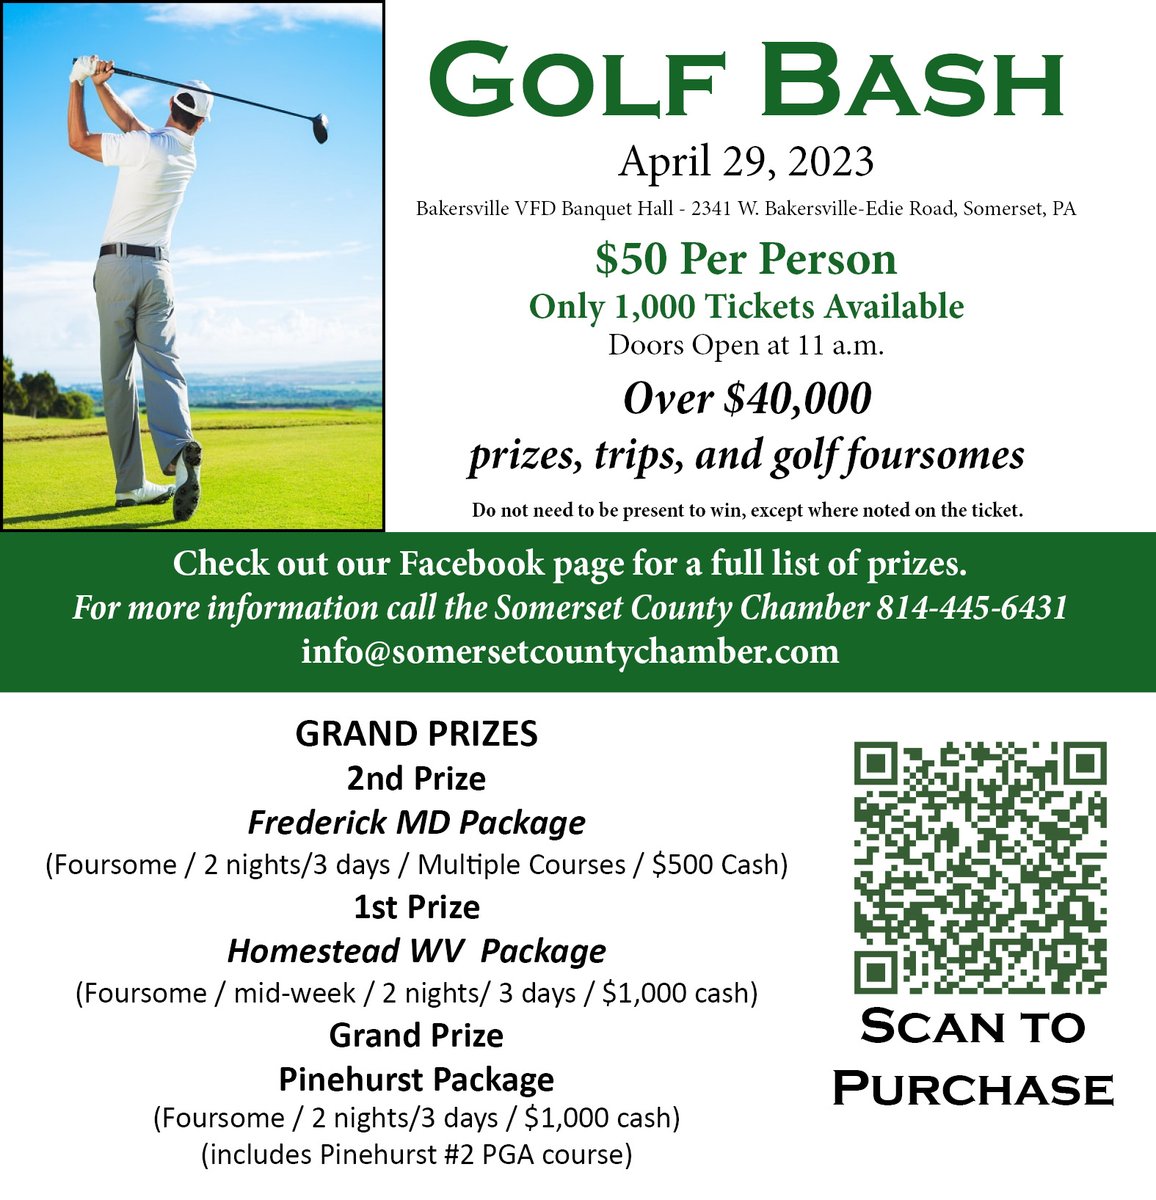 Purchase a golf bash ticket online and a chance to win fabulous prizes. somersetcountychamber.com/product-catego…